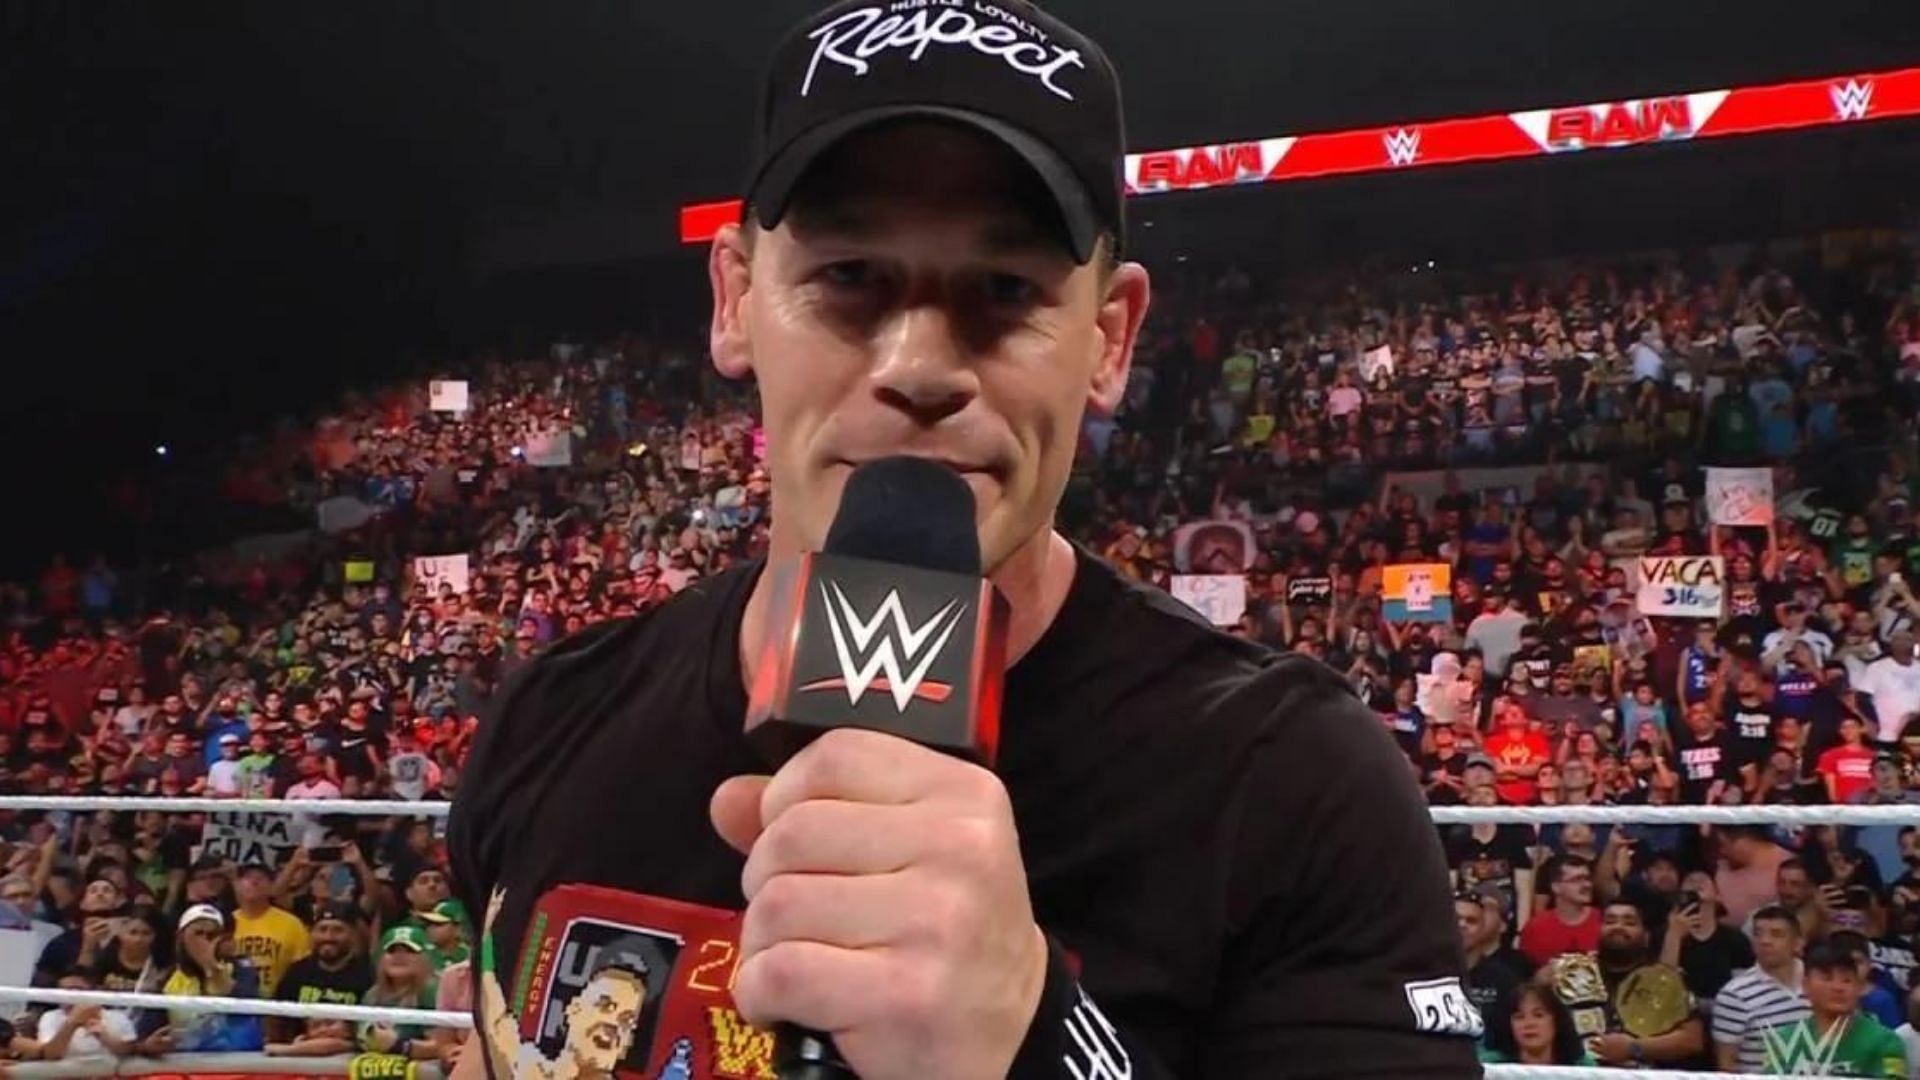 John Cena is expected to be involved at WrestleMania 39